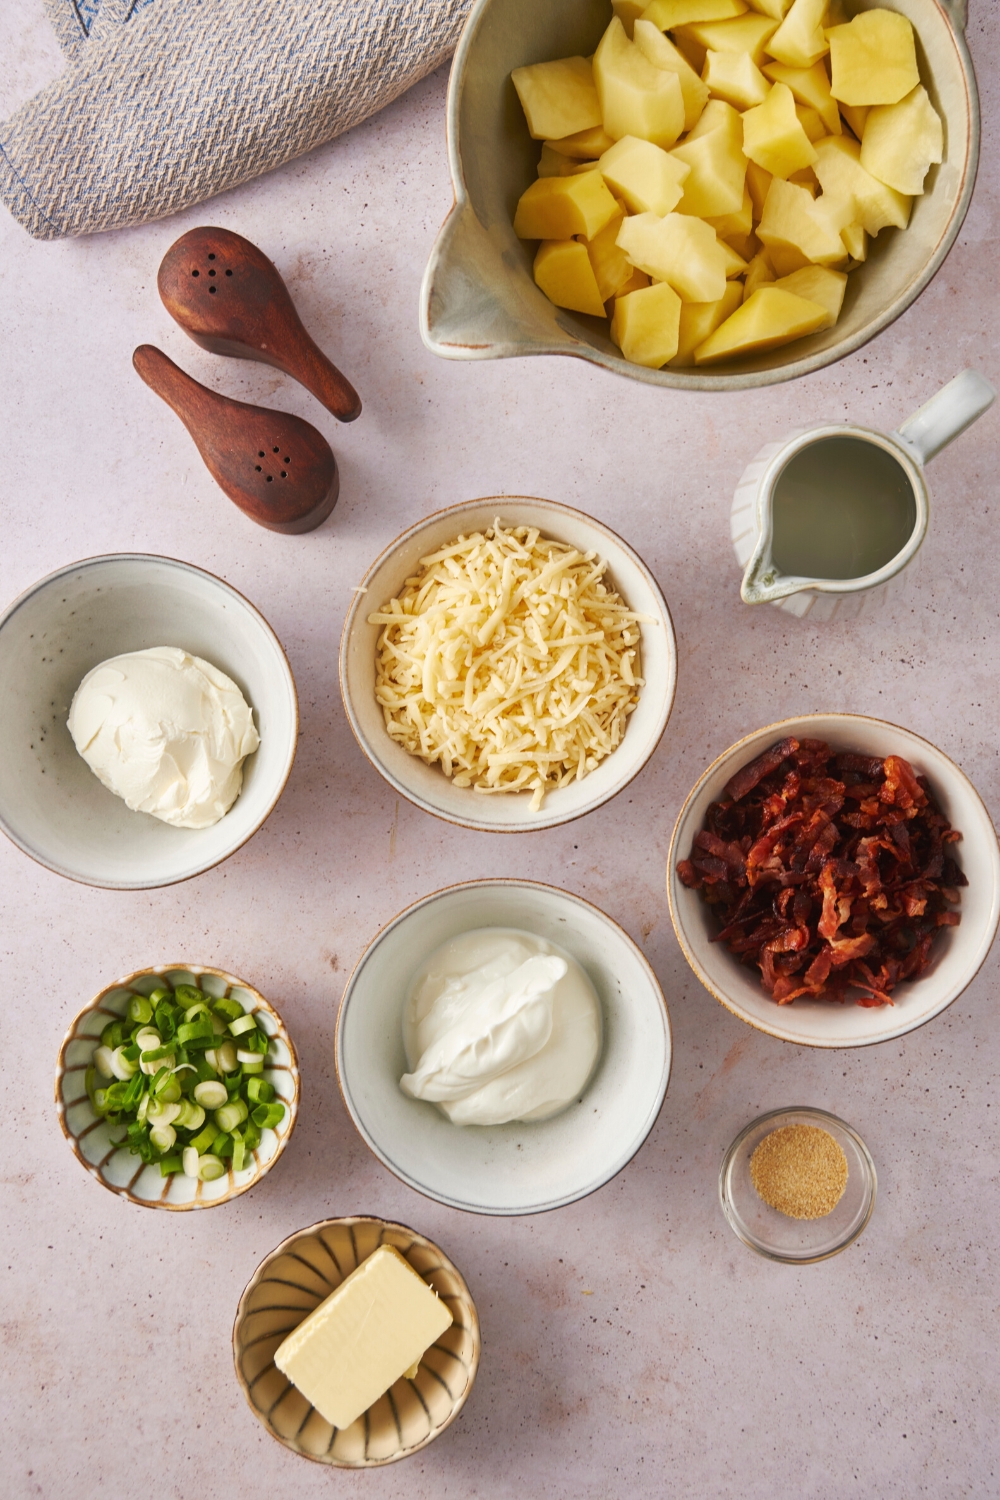 A bowl of diced potatoes, a bowl of cream cheese, a bowl of shredded cheese, a bowl of bacon bits, a bowl of chopped green onion, a bowl of sour cream, and a bowl of butter all on a counter.